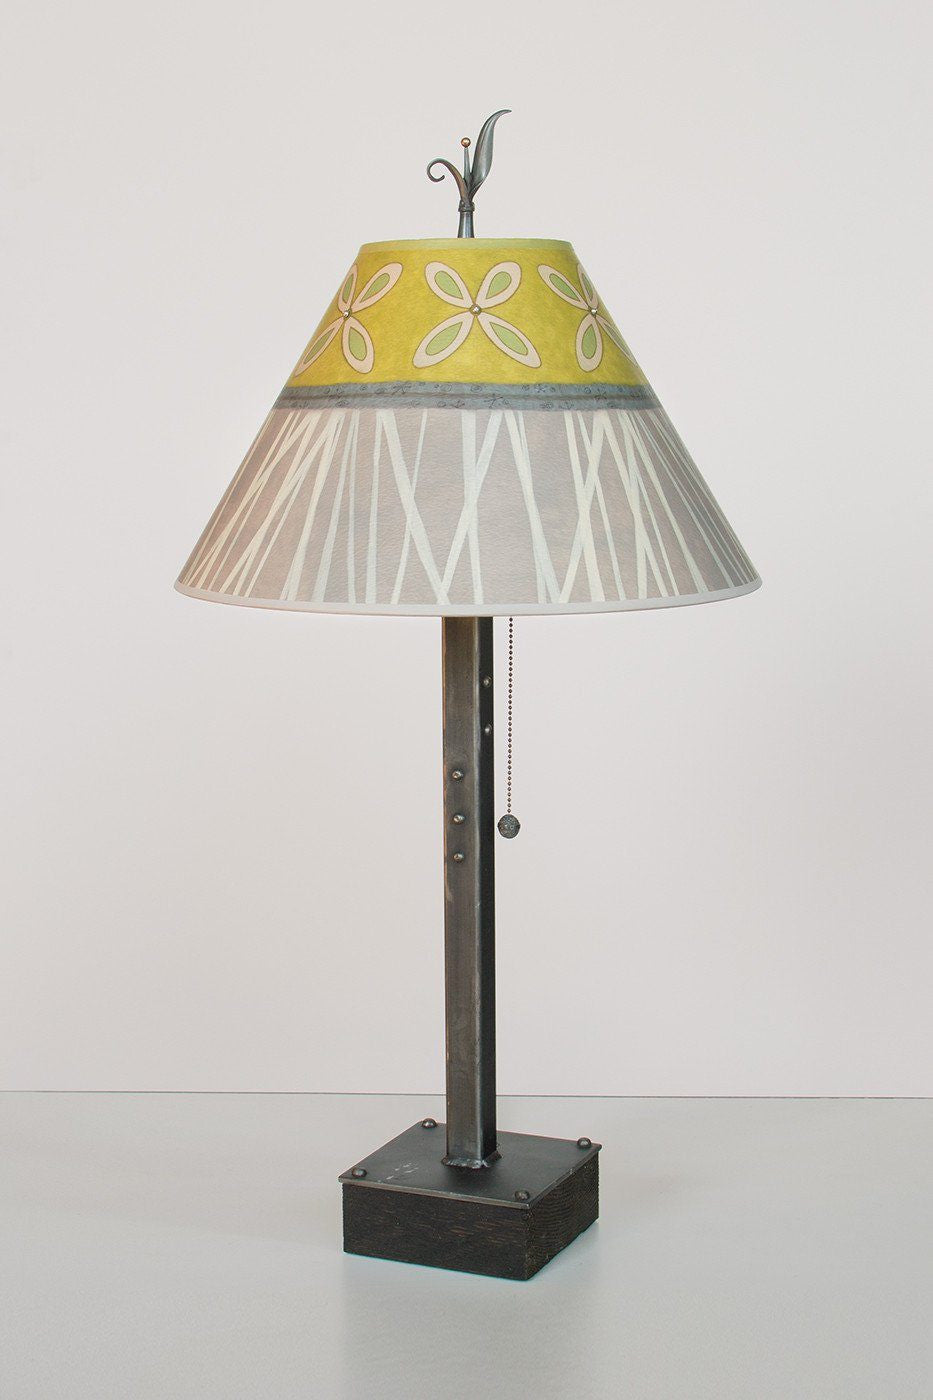 Steel Table Lamp on Wood with Medium Conical Shade in Kiwi